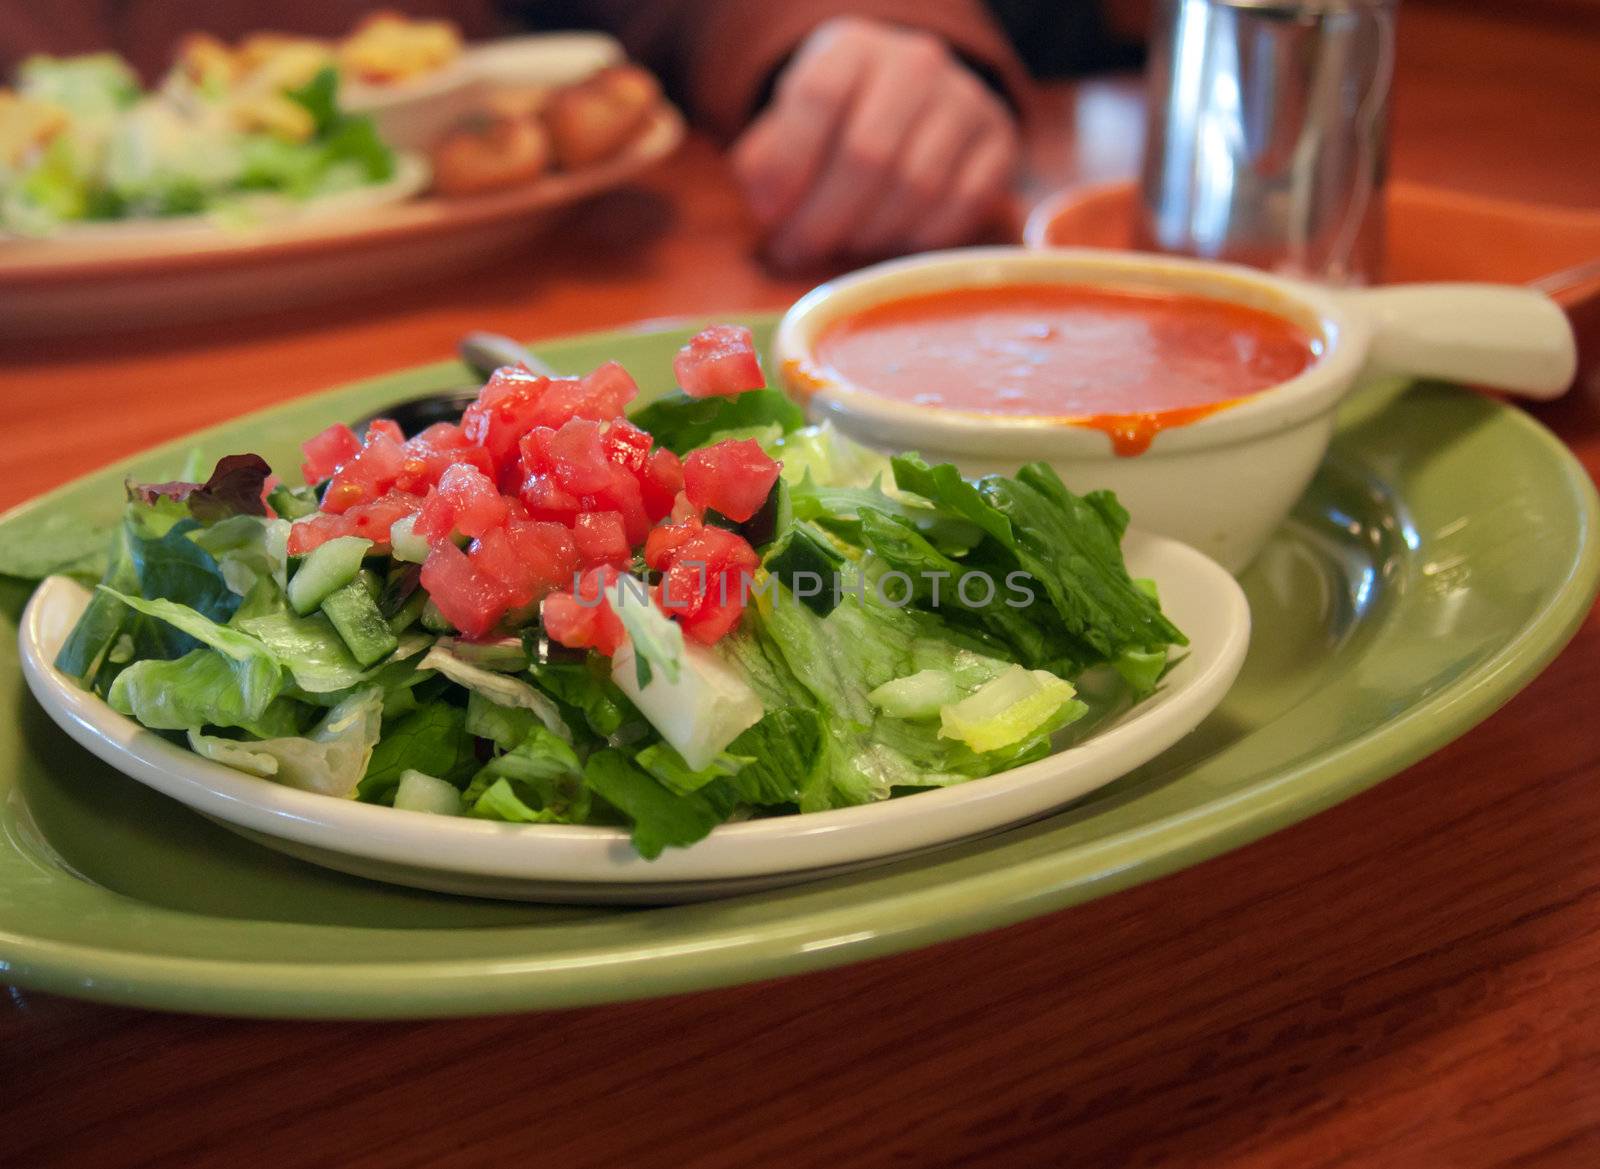 A simple restaurant salad of lettuce, tomato and cucumber with a small bowl of tomato basil soup.